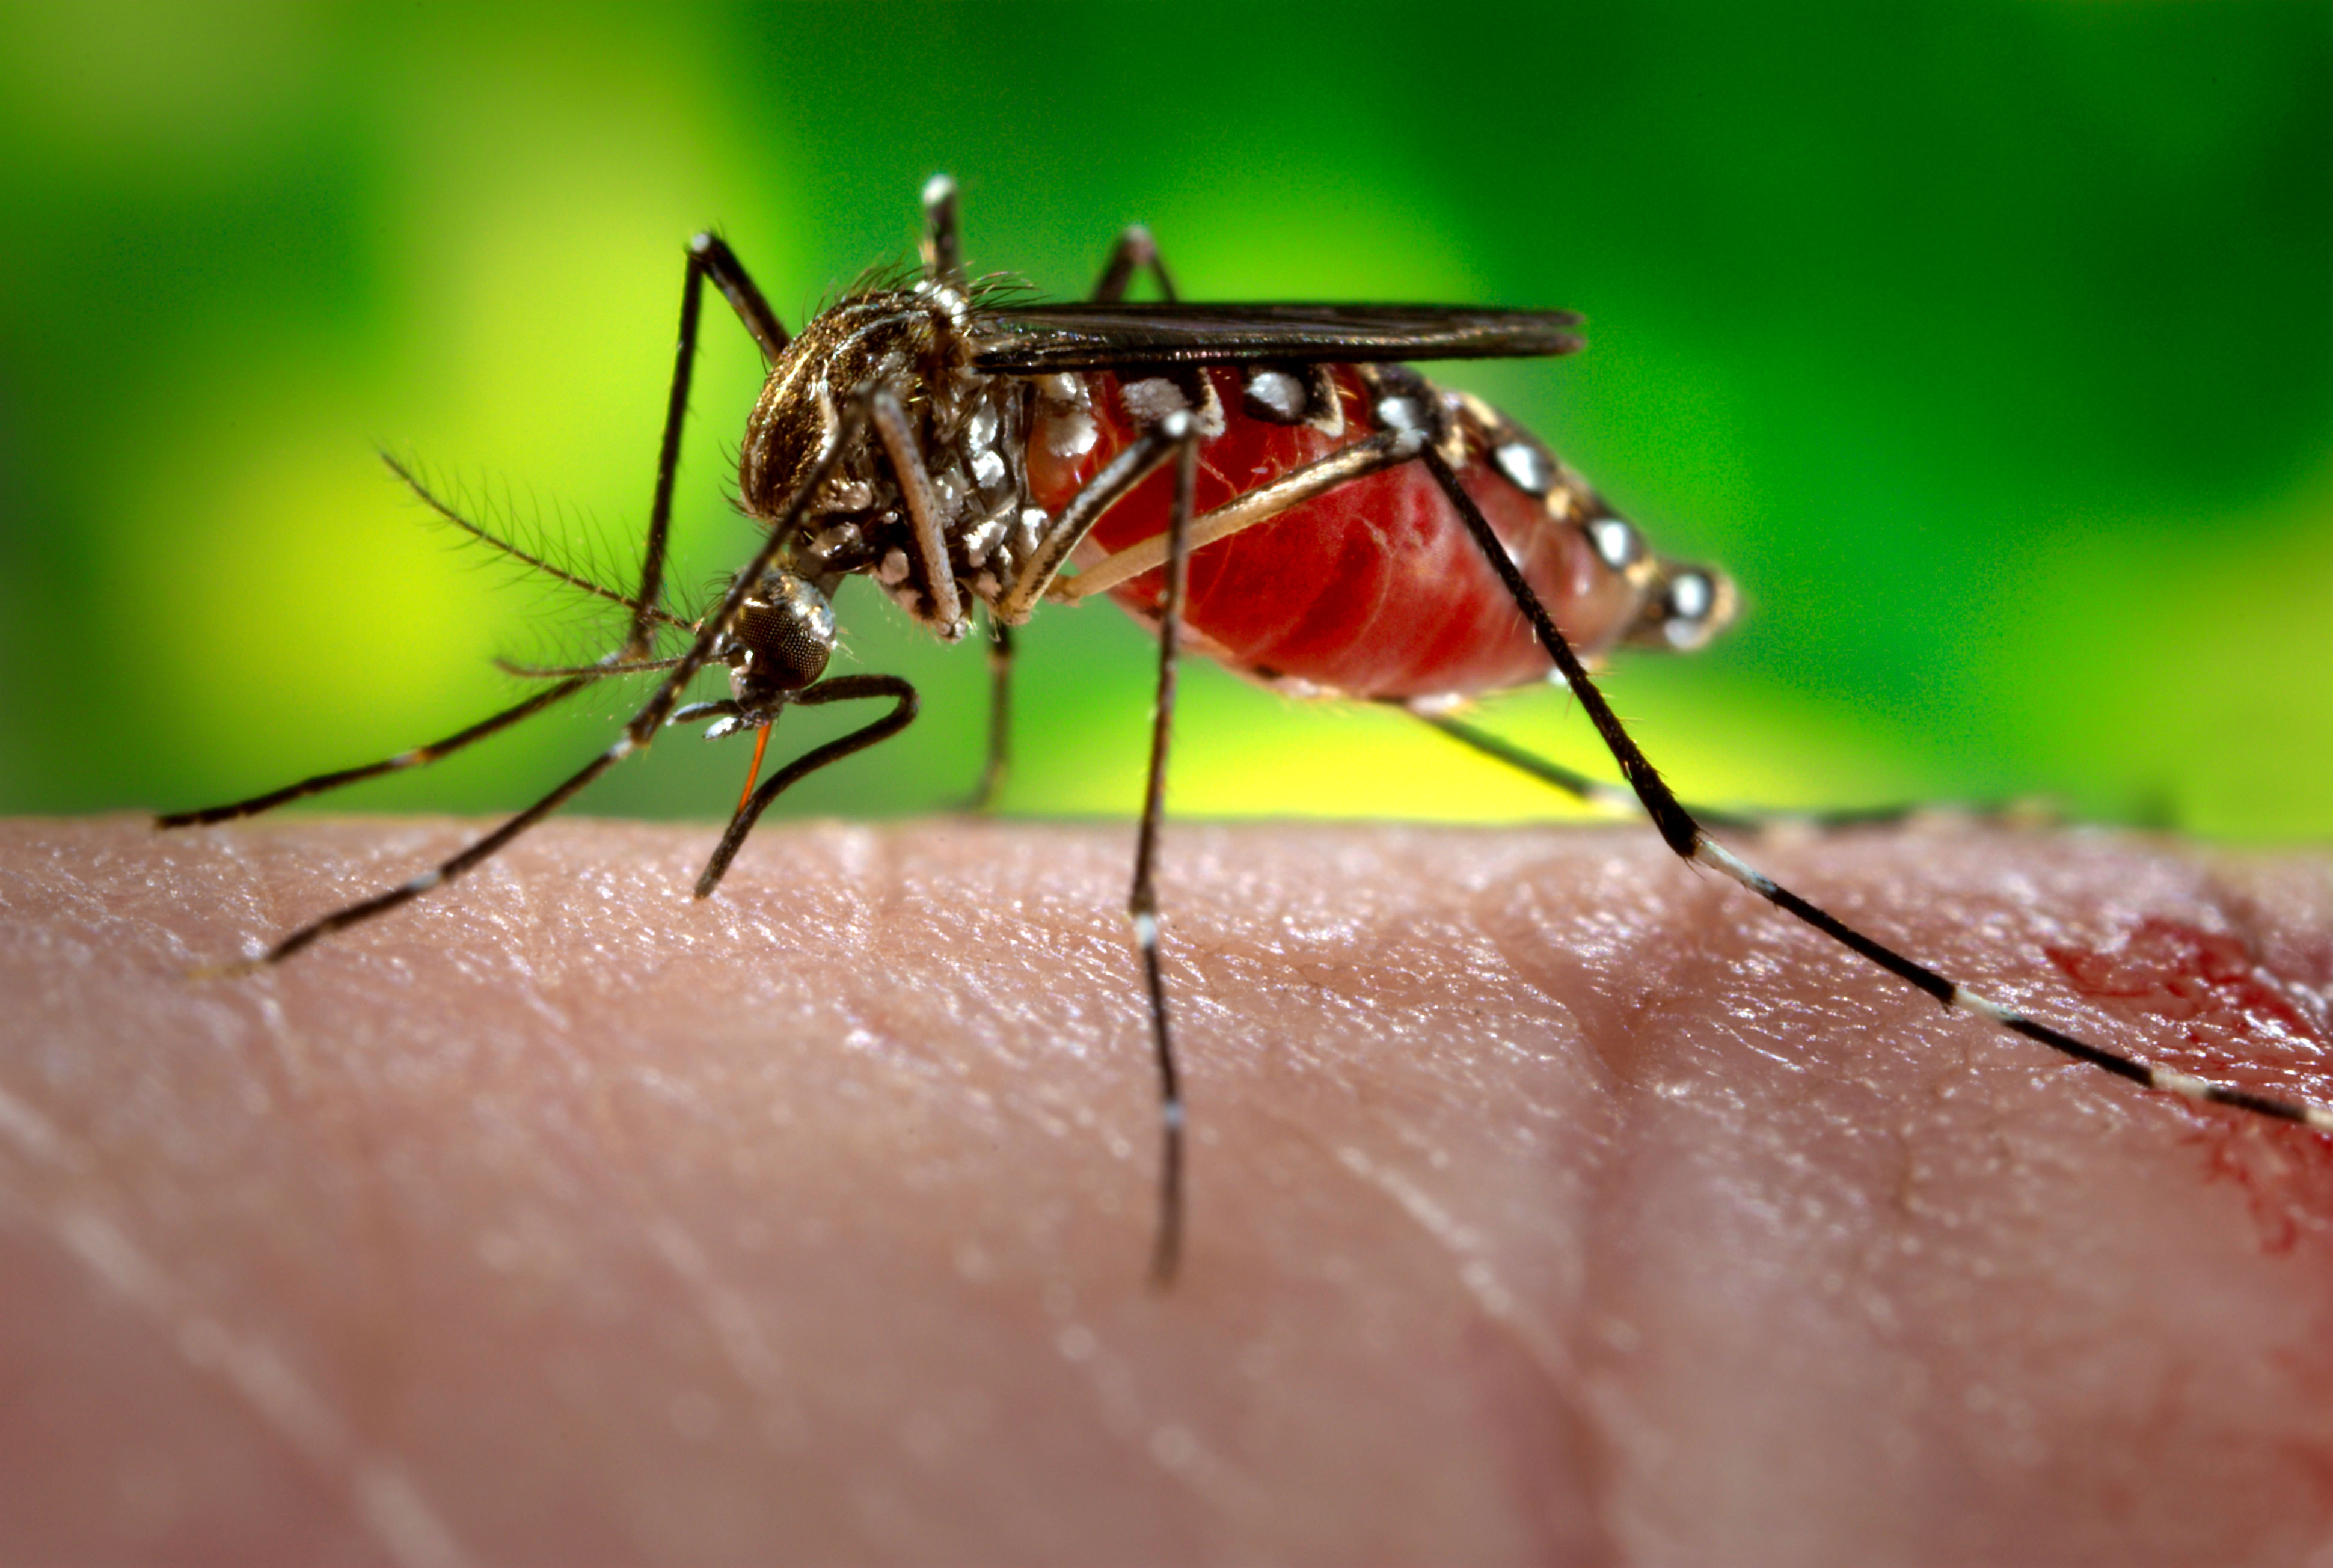 Mosquito Bite Symptoms and Treatment, Mosquitoes